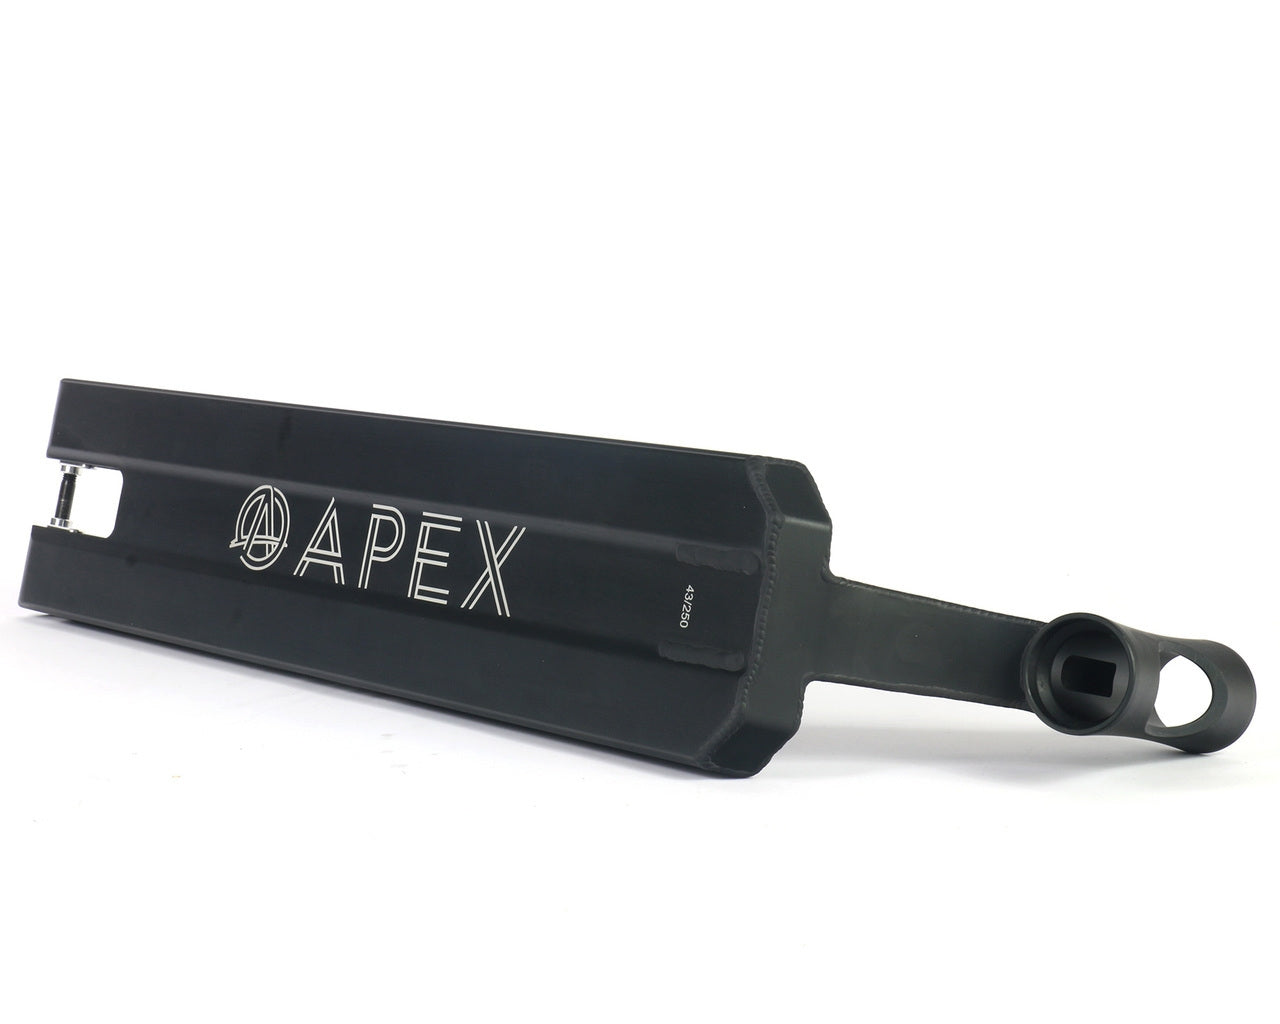 Apex Pro Black Boxed Stunt Scooter Deck - 5" x 20.1" - Angle